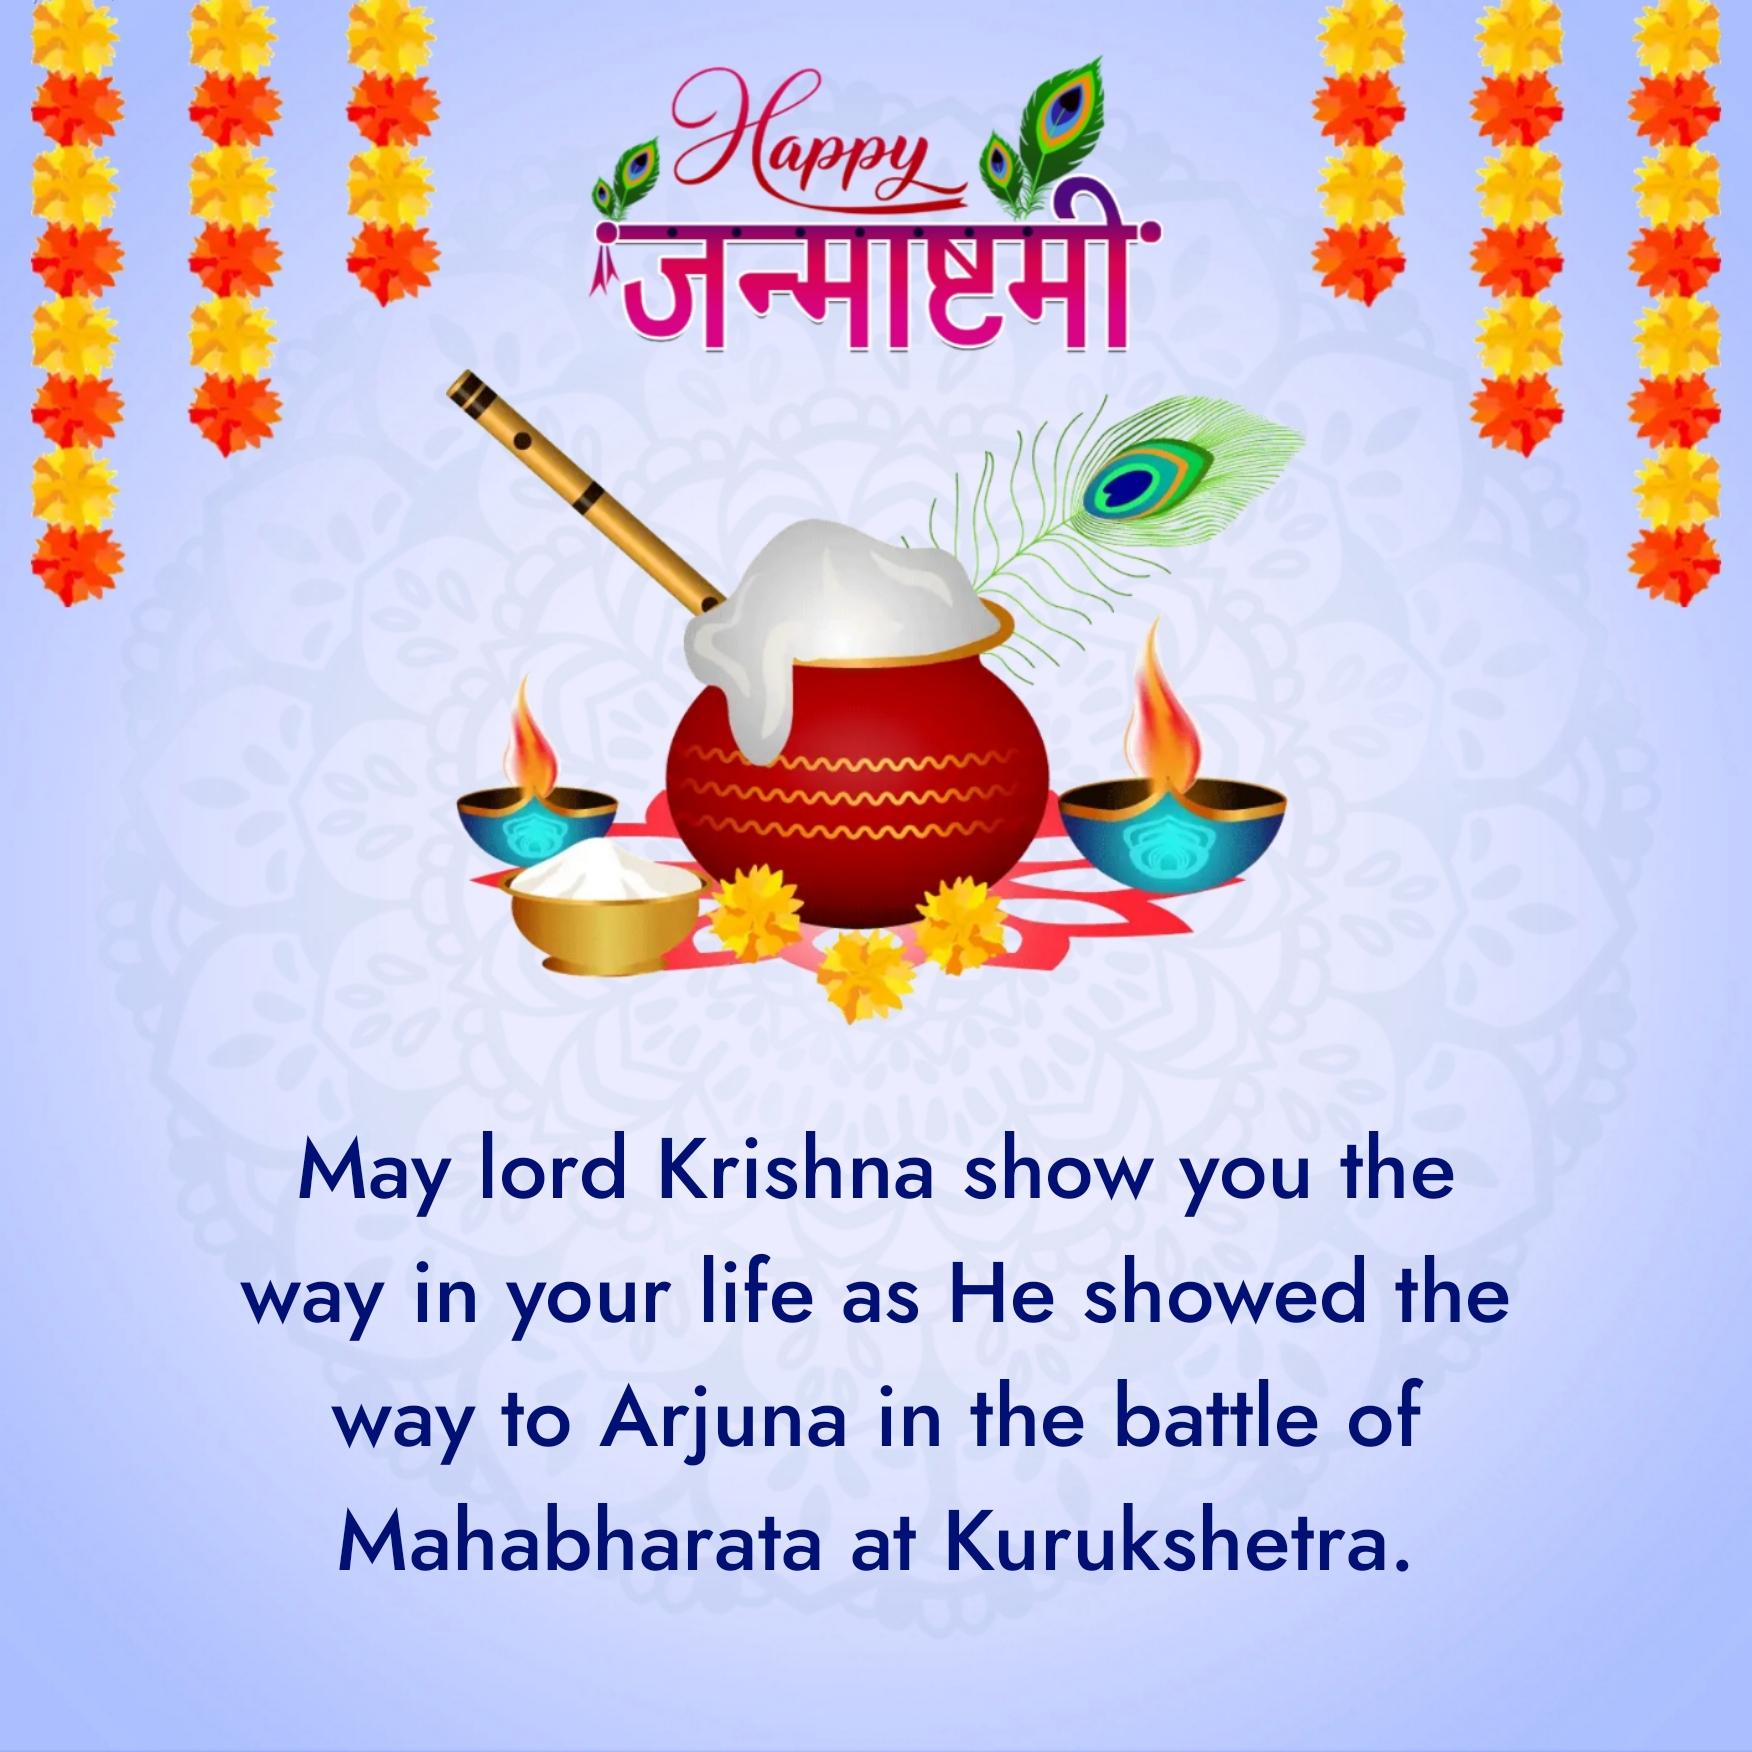 May lord Krishna show you the way in your life